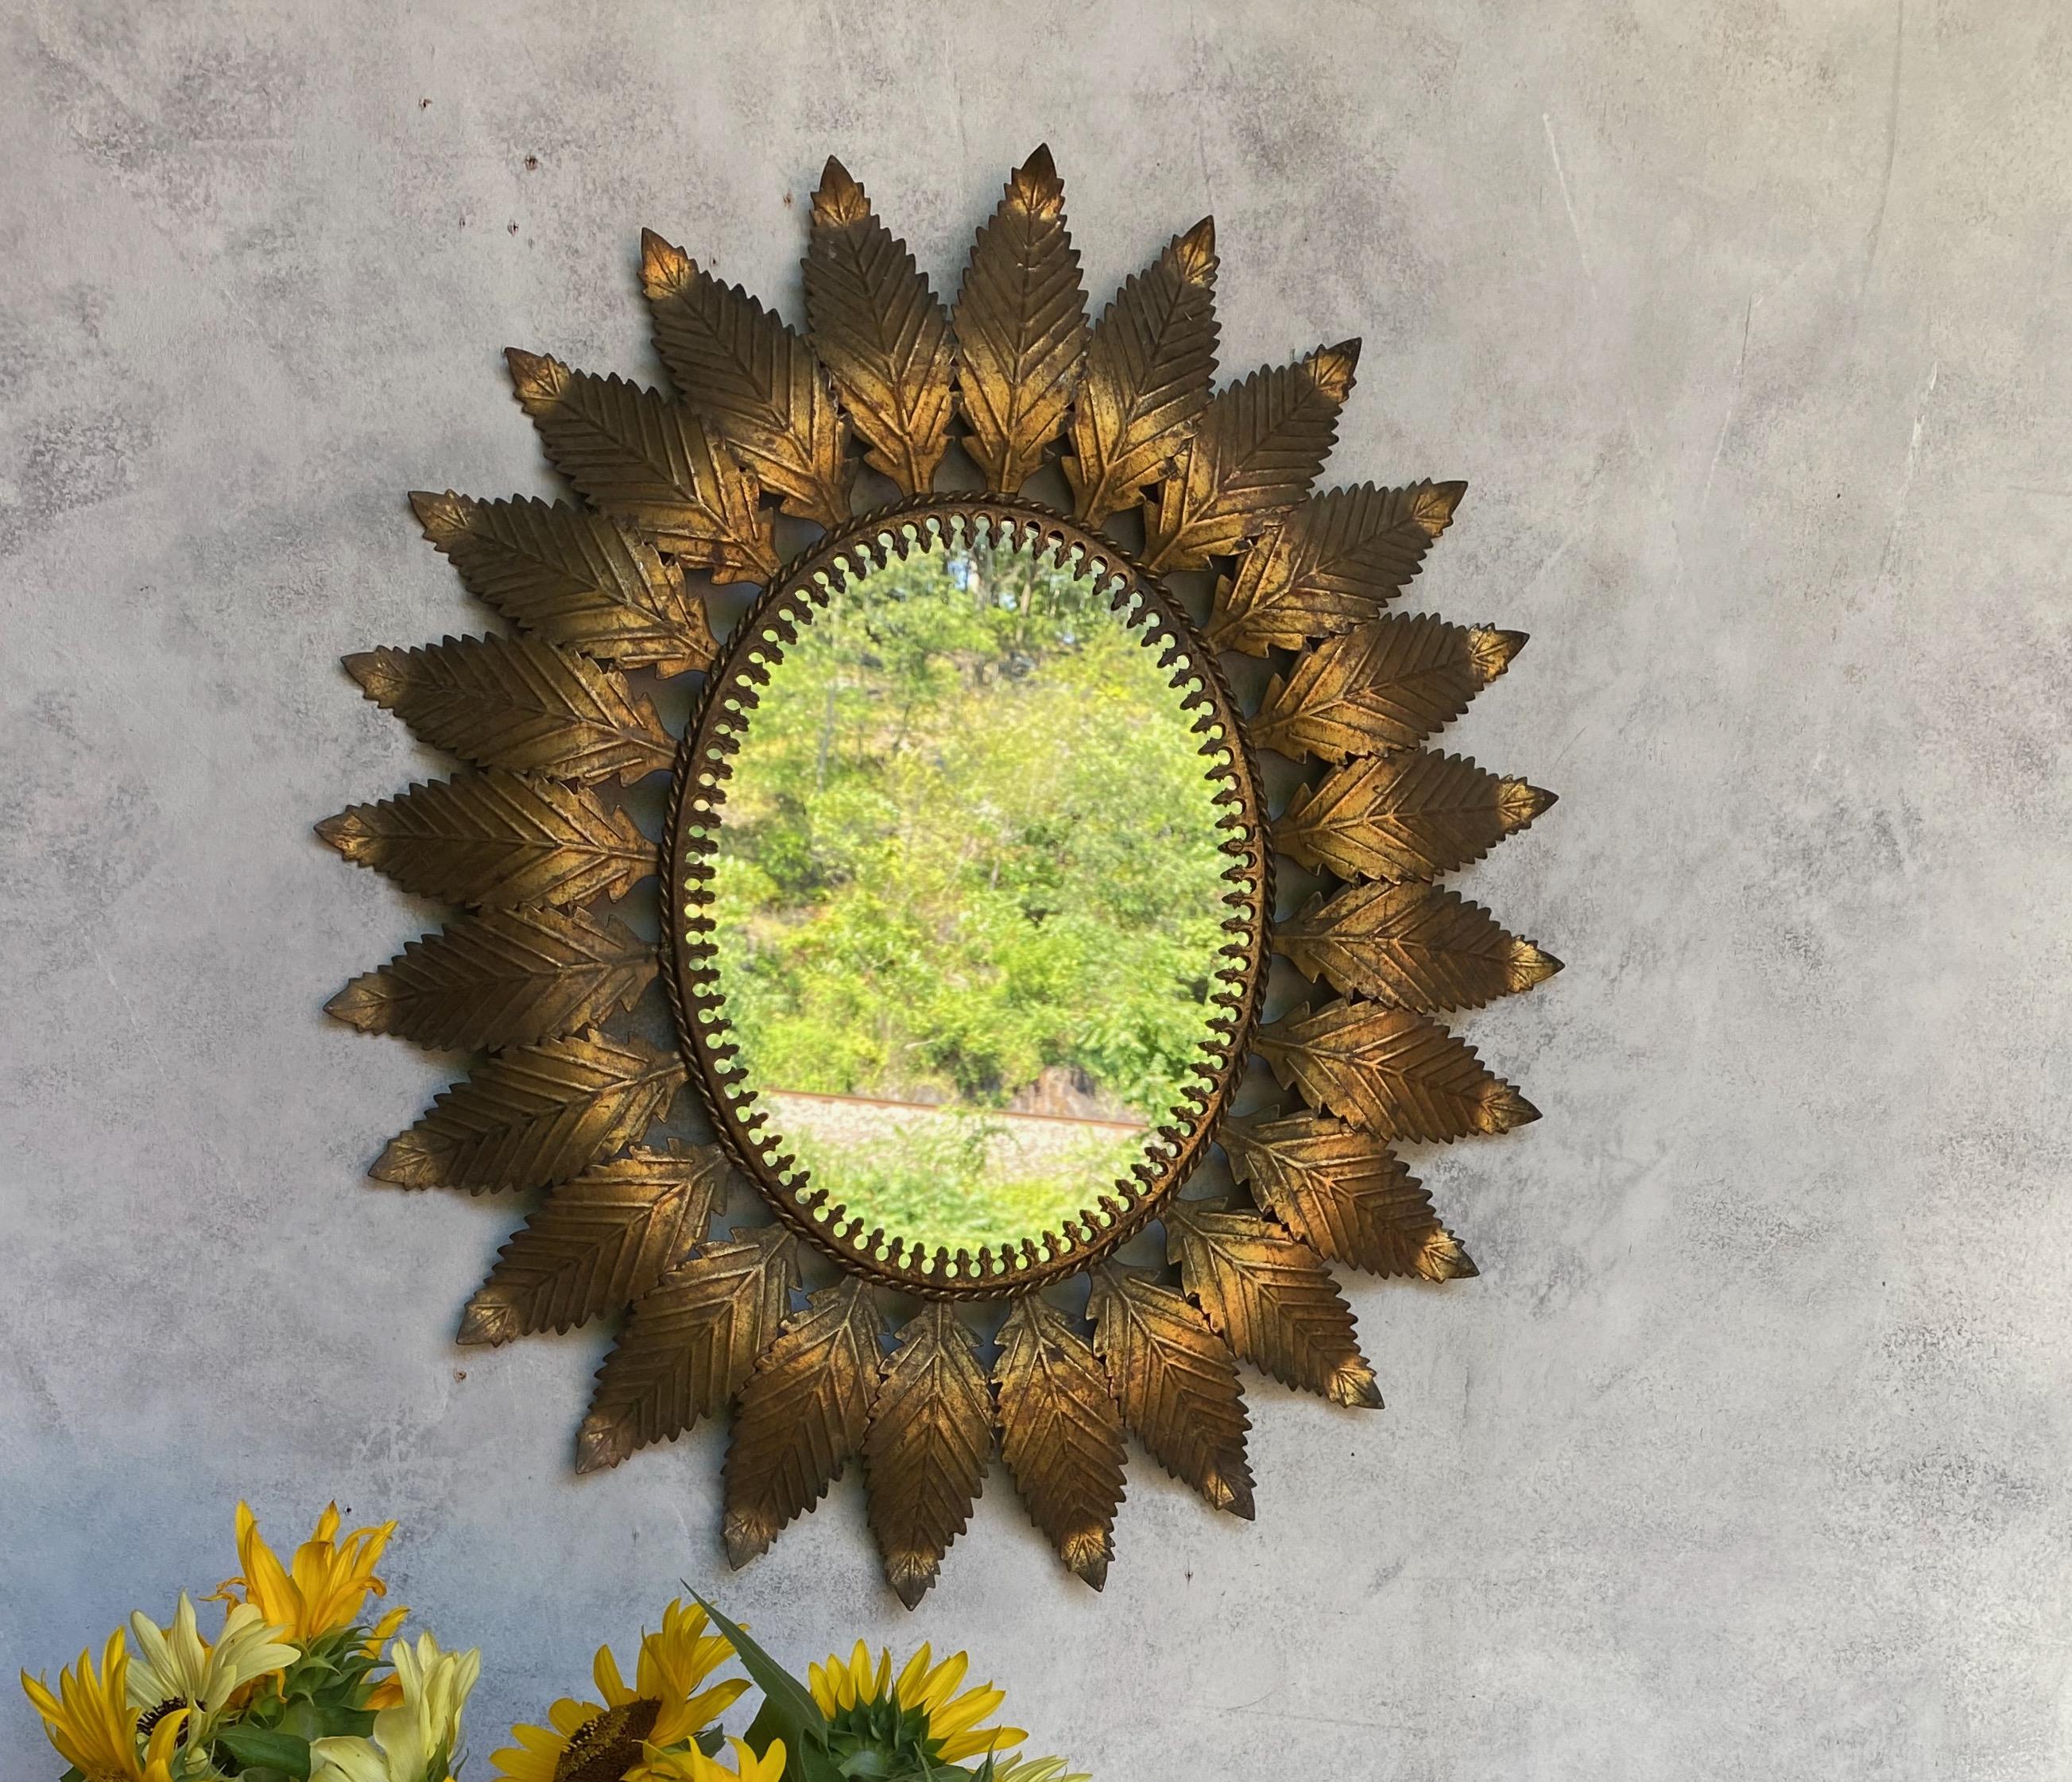 An oval gilt metal sunburst mirror with classical stylized leaves radiating out  from an interior border, representing a modern trefoil design. We recently added a felt backing to the mirror to give it more protection and a finished look. Spanish